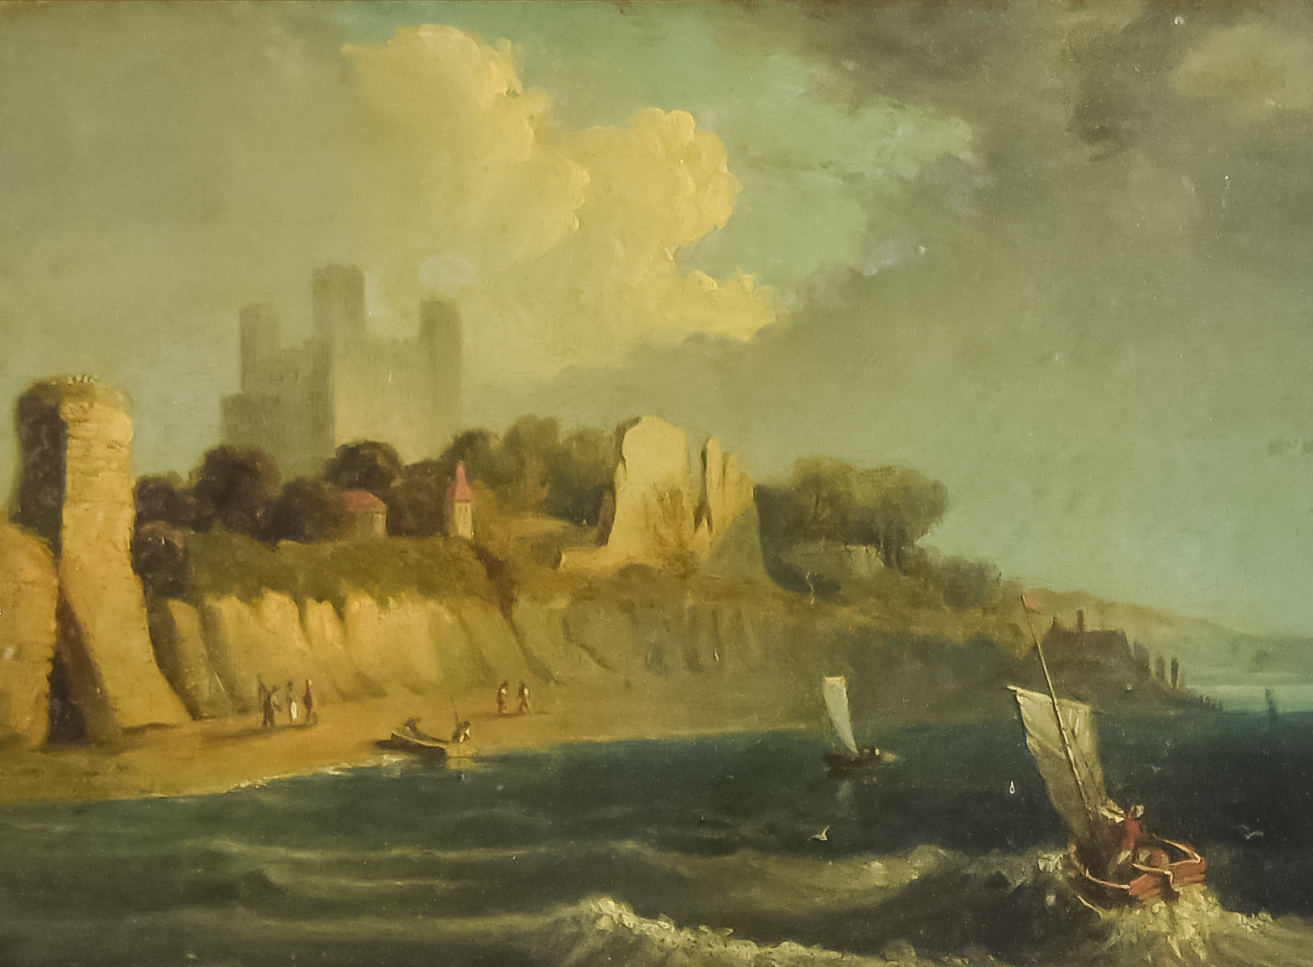 19th Century British School - Oil painting - "Rochester Castle", unsigned, mahogany panel 9ins x